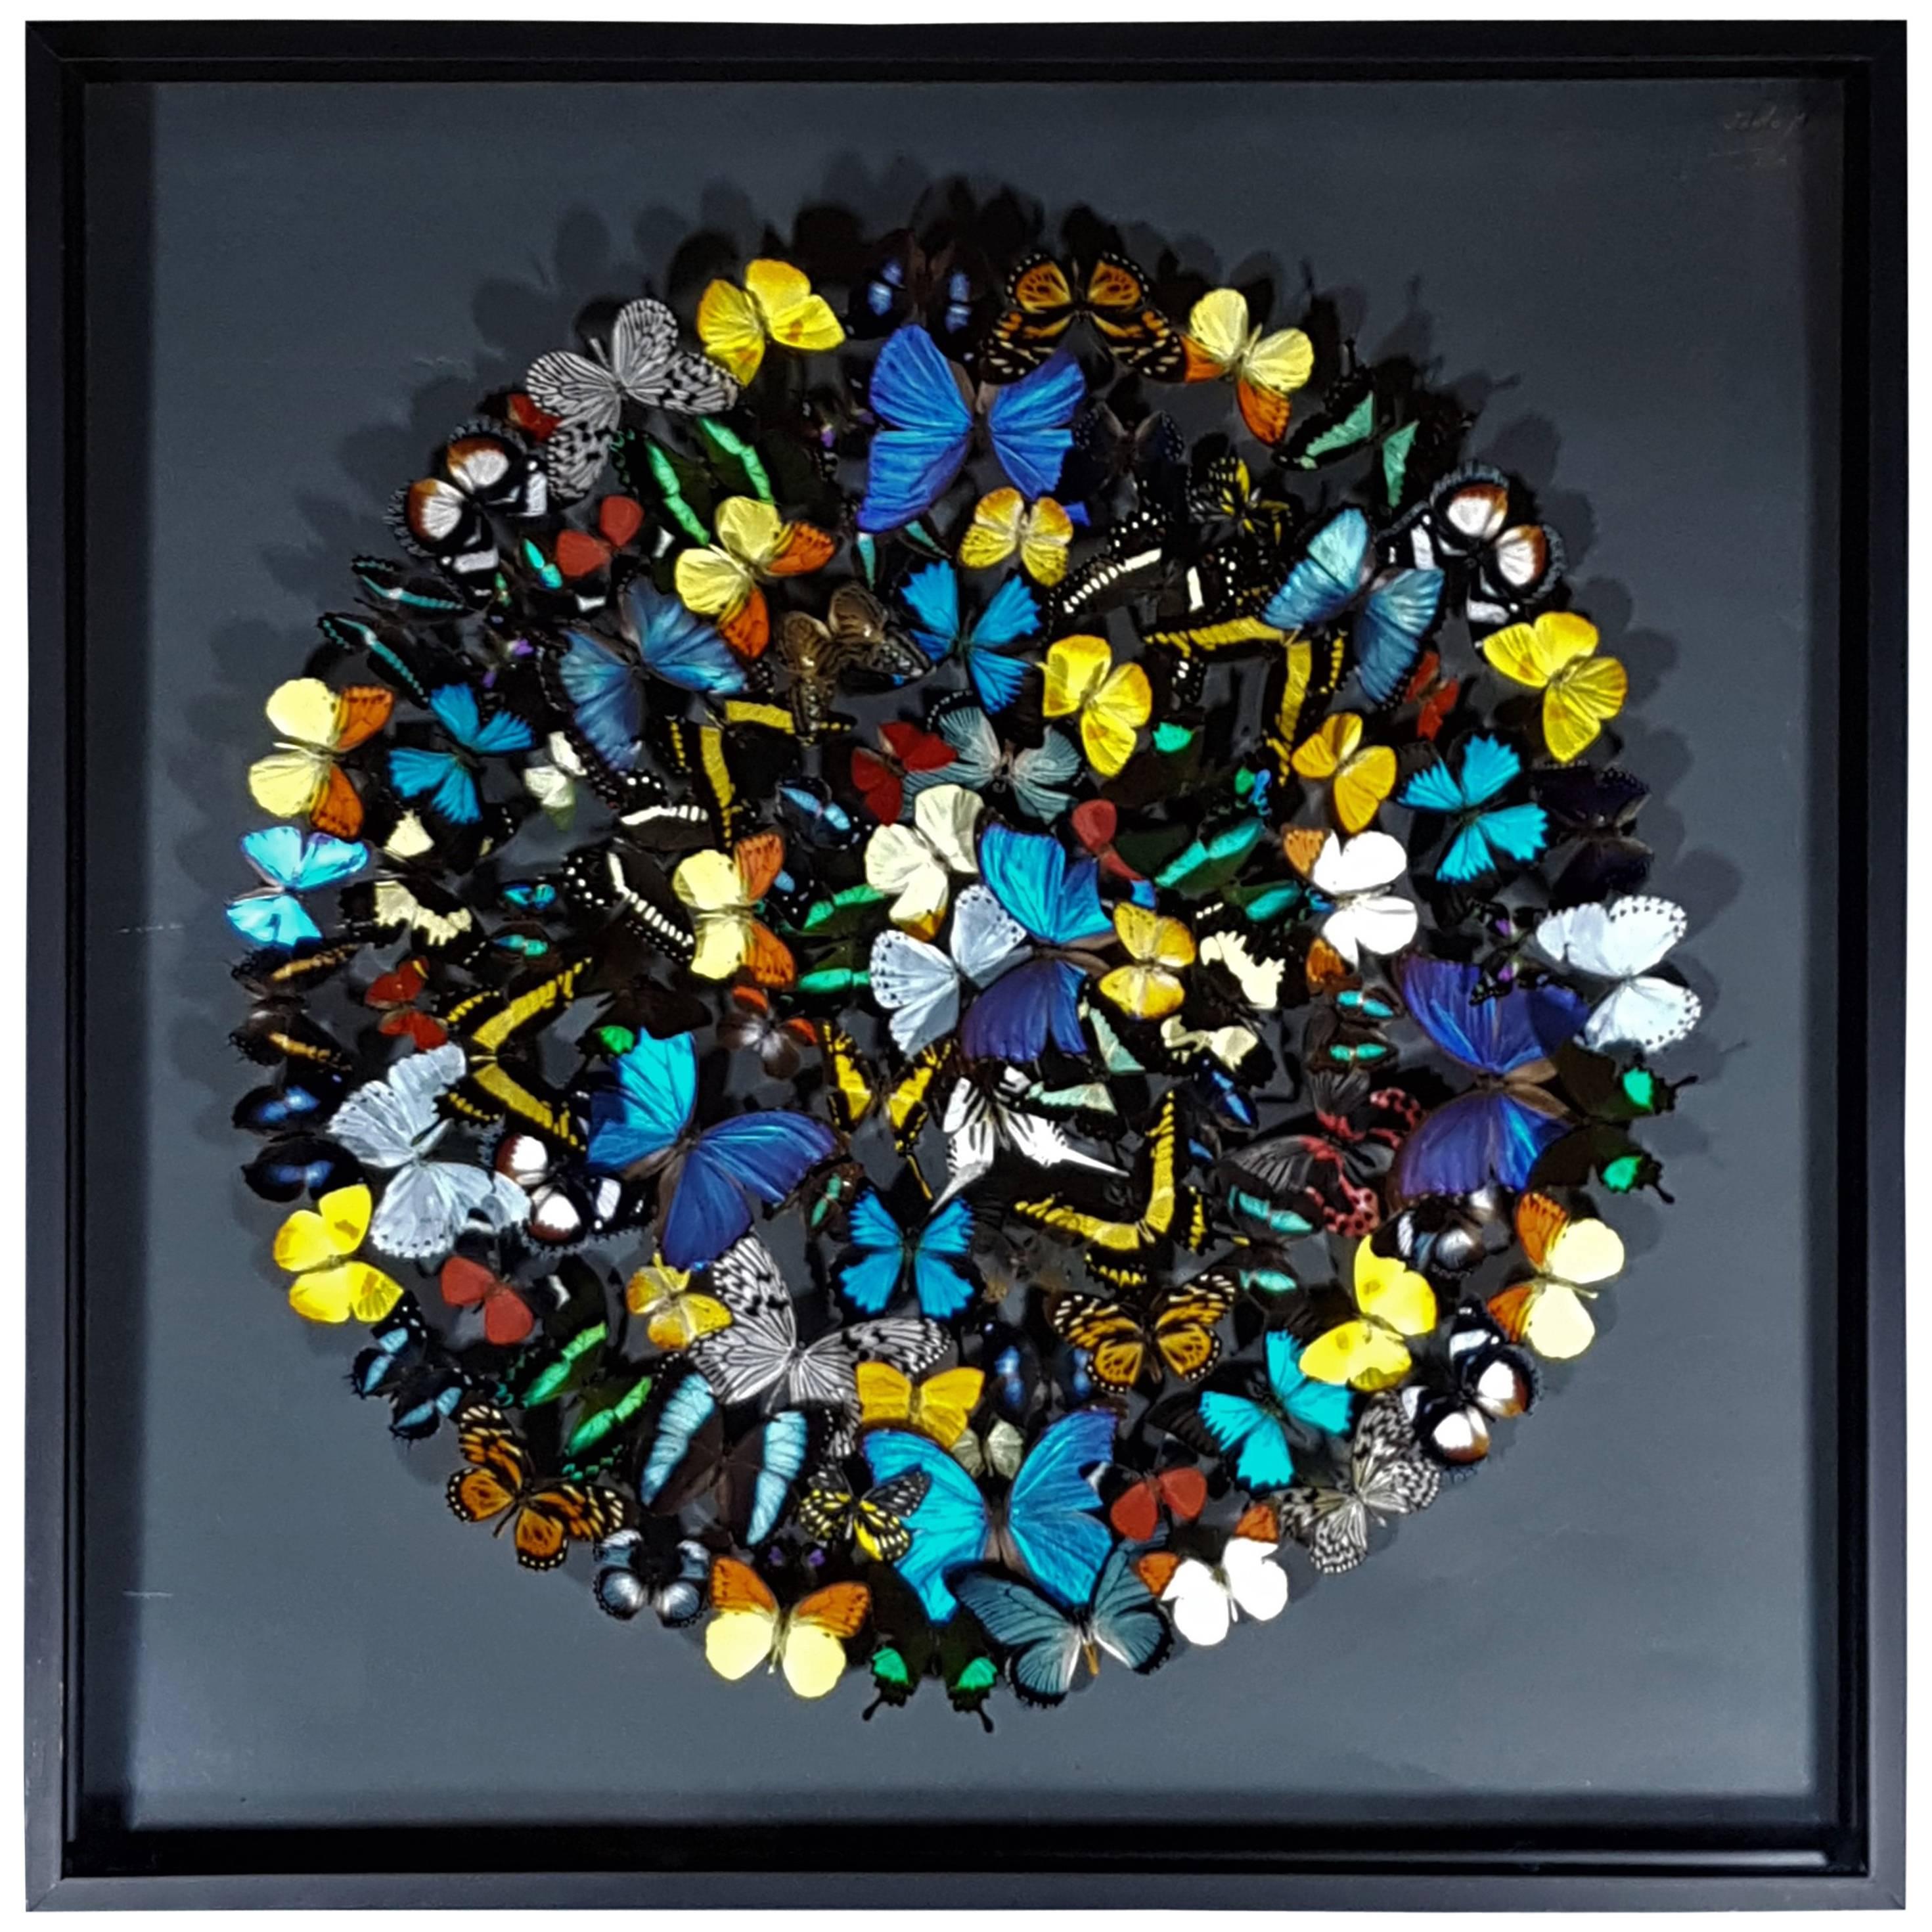 Stunning Colourful Composition of Framed Butterflies by Olivier Violo For Sale